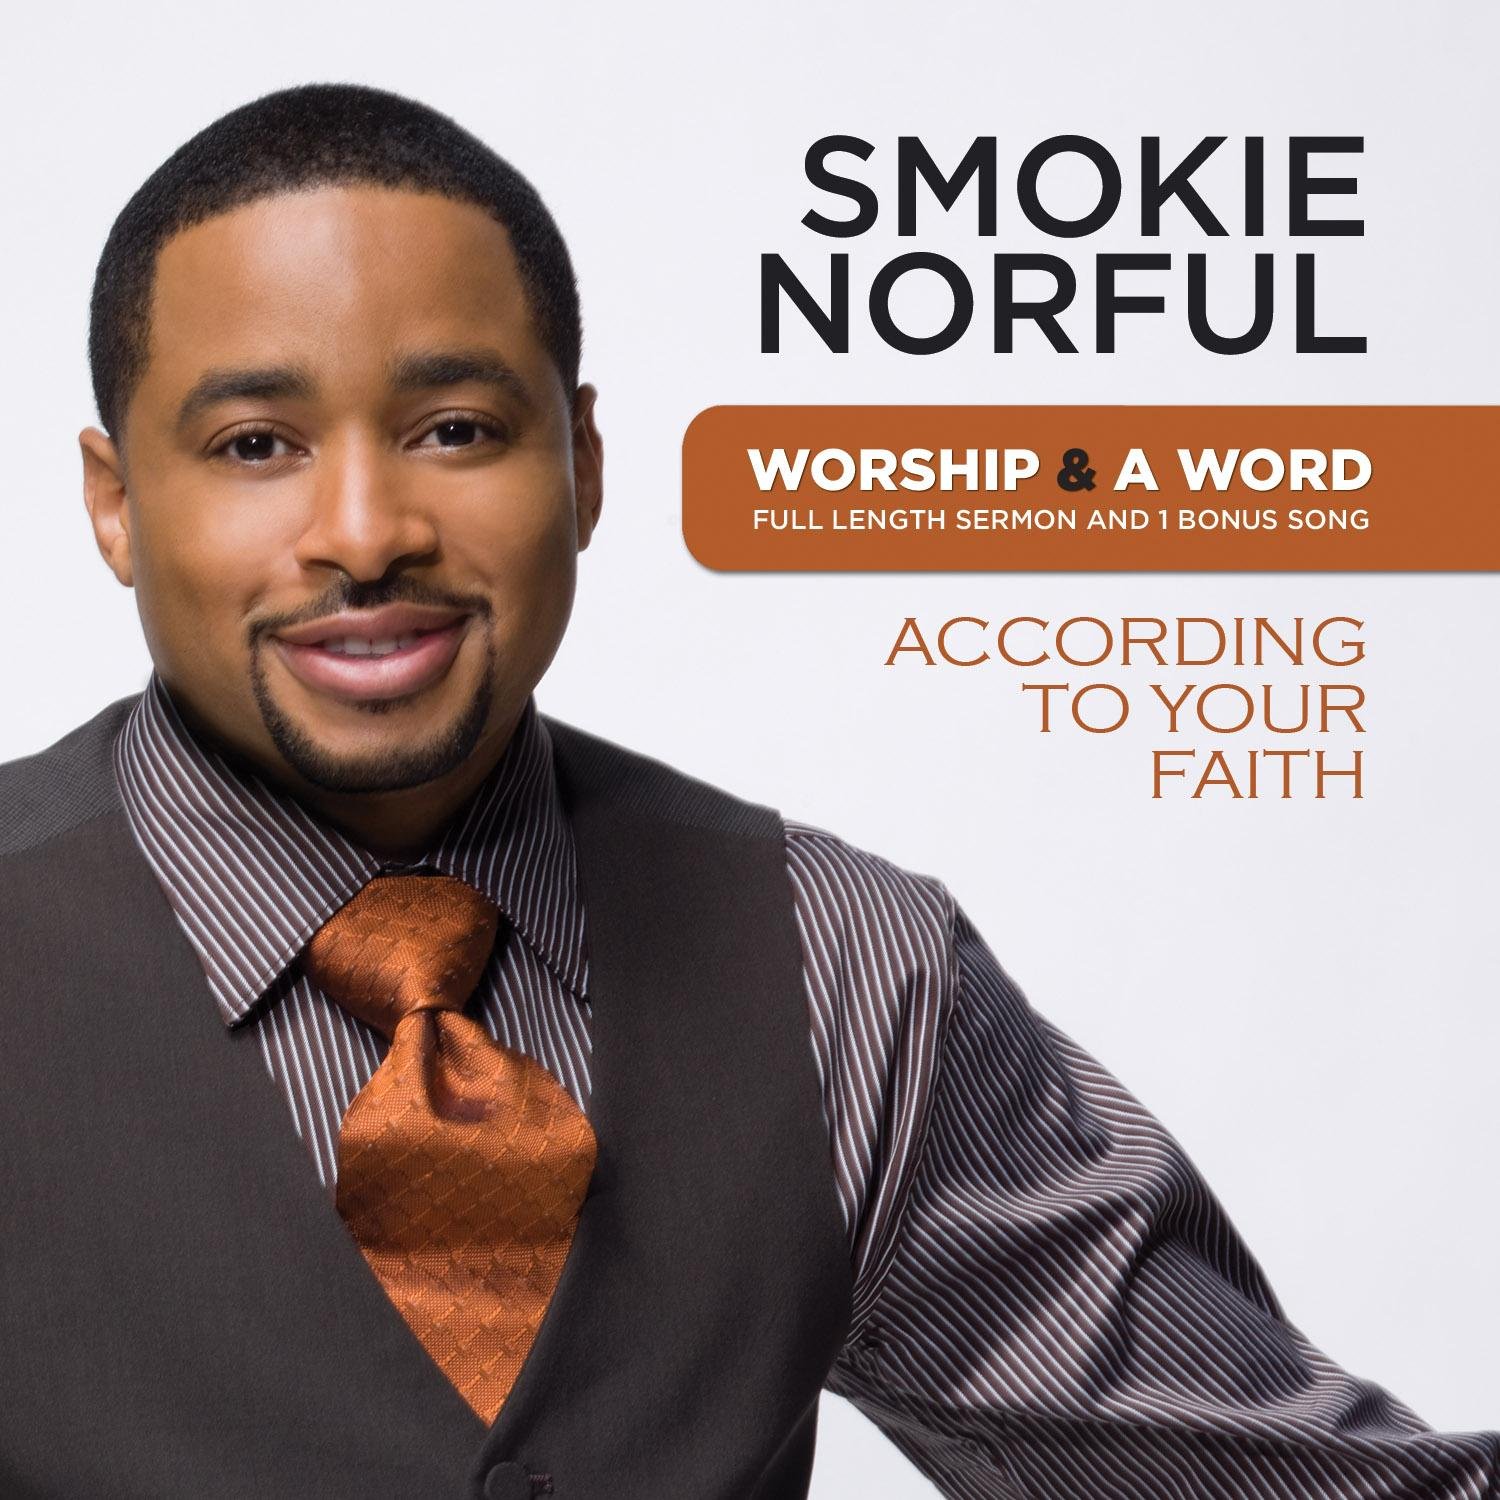 Art for The Key: Believe The Lord by Smokie Norful